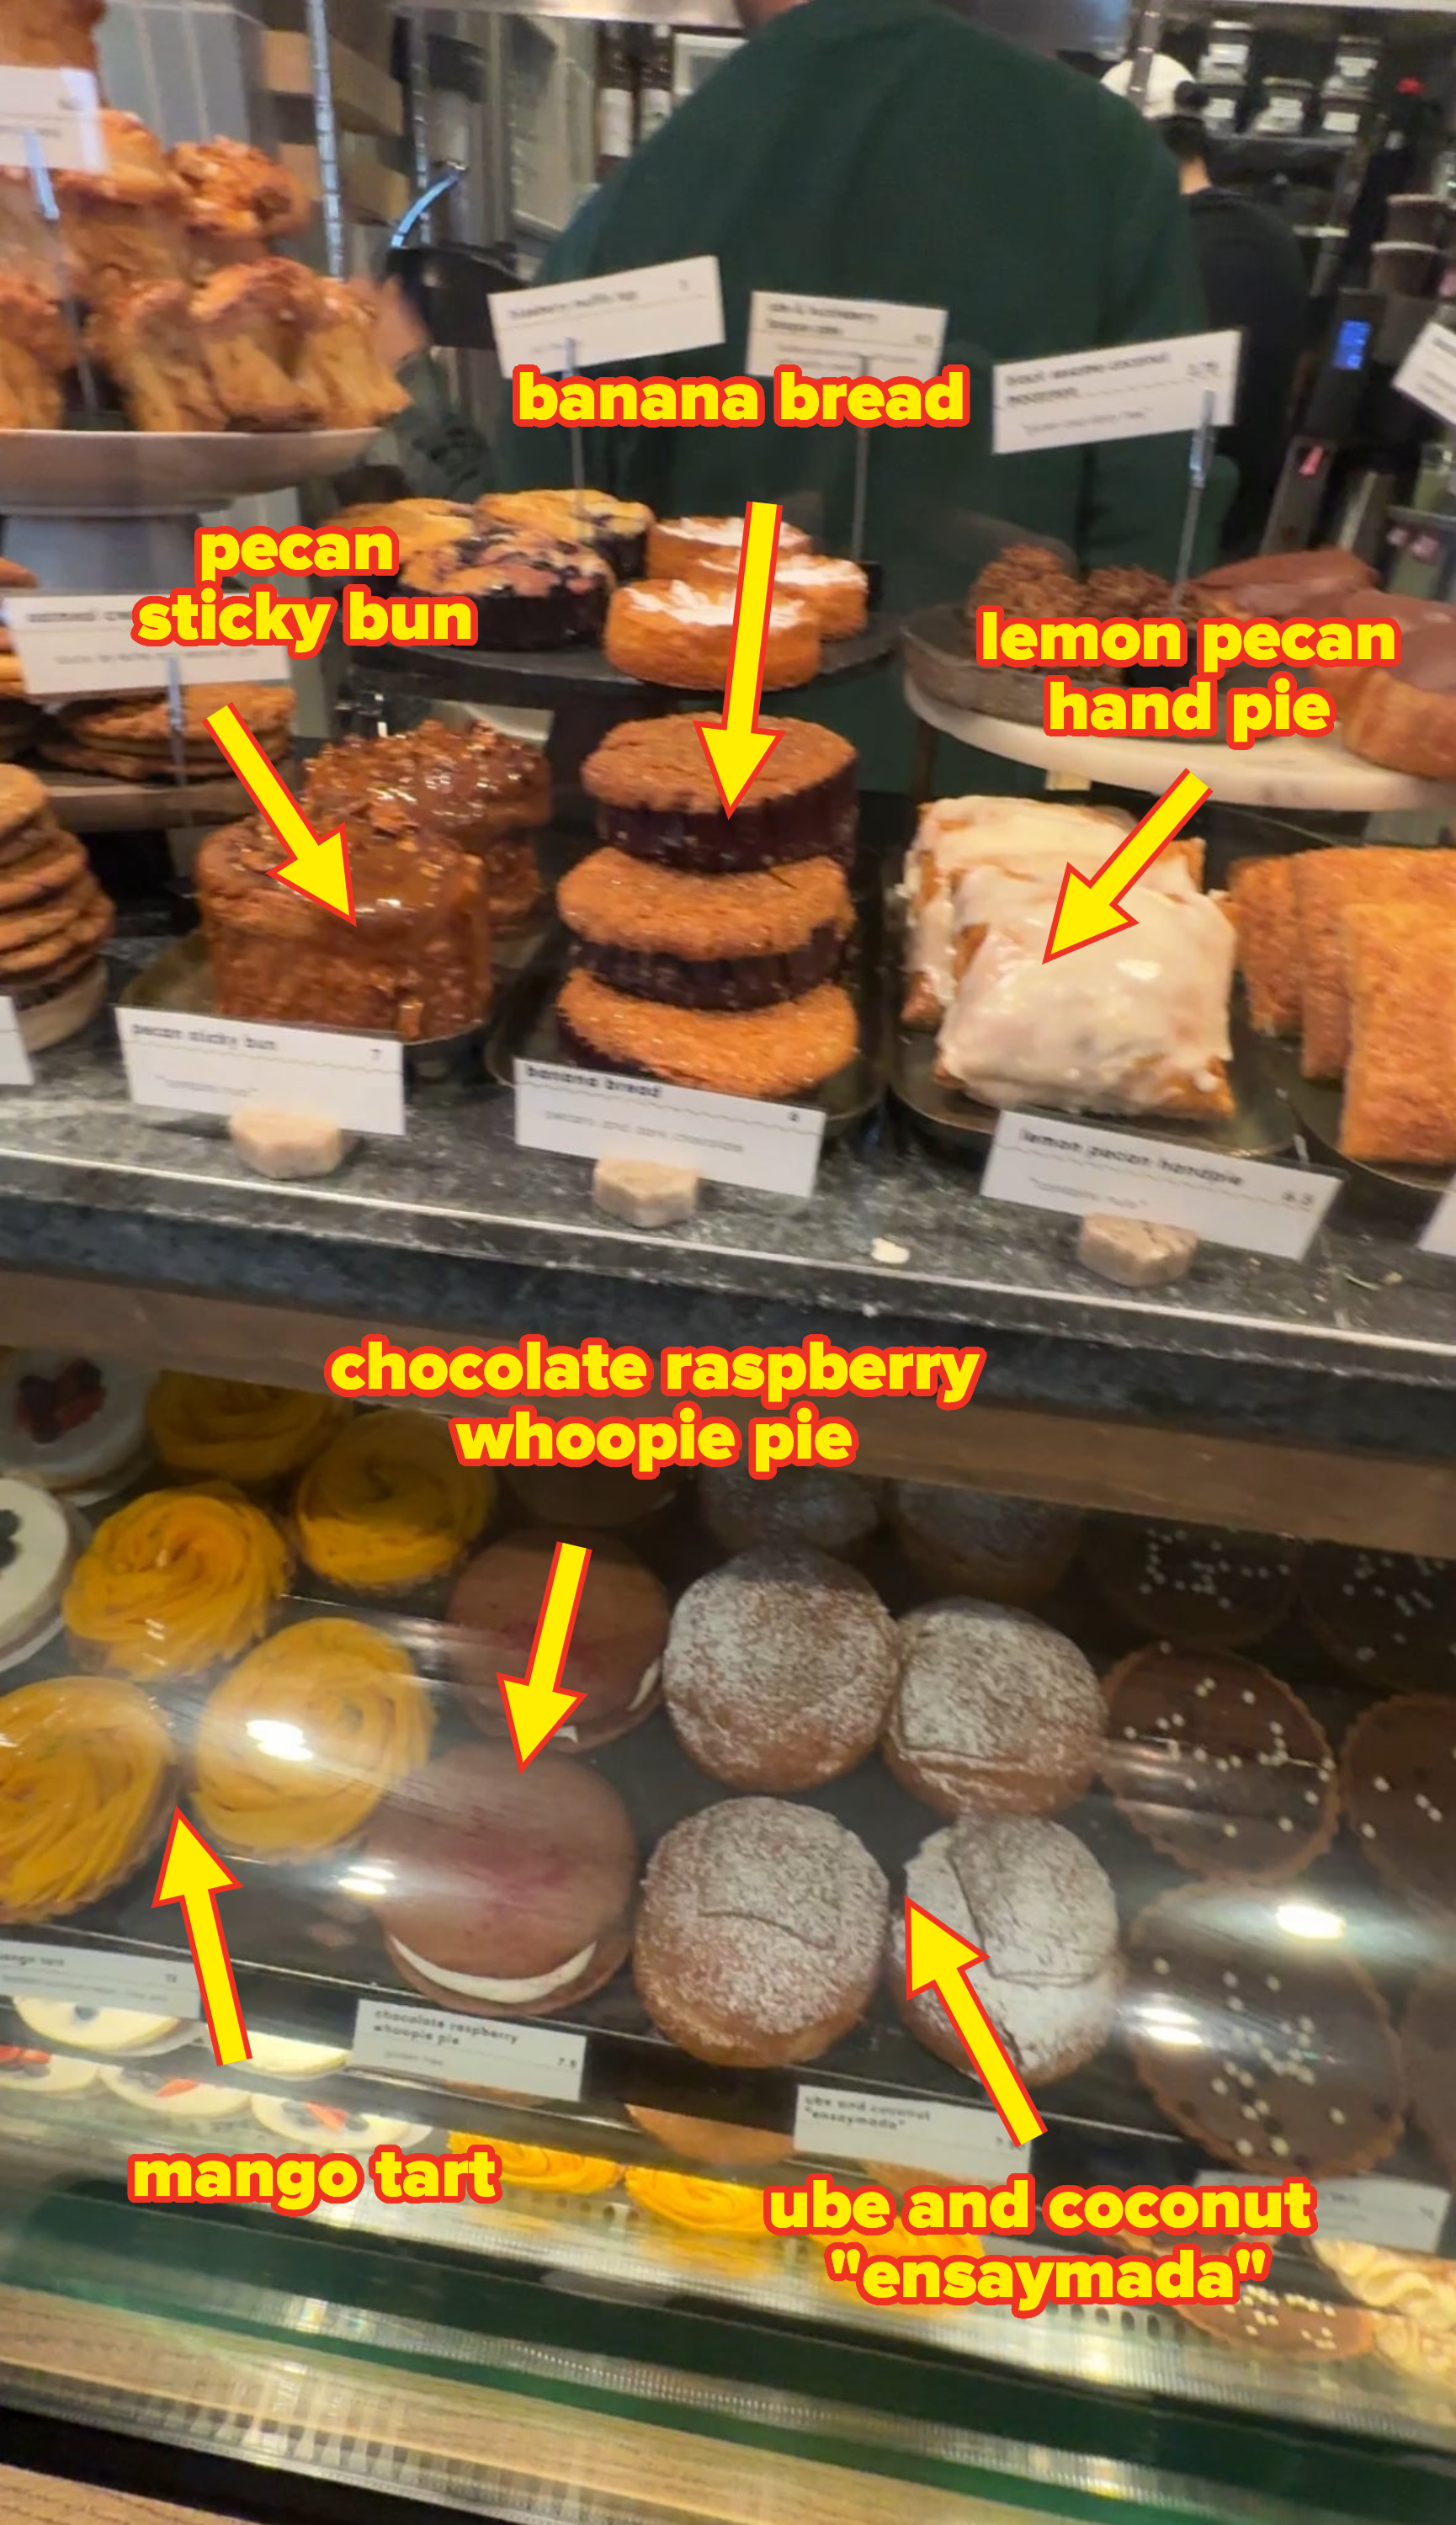 A bakery display case featuring various pastries, including cookies, cakes, and donuts, with labels indicating their names and prices